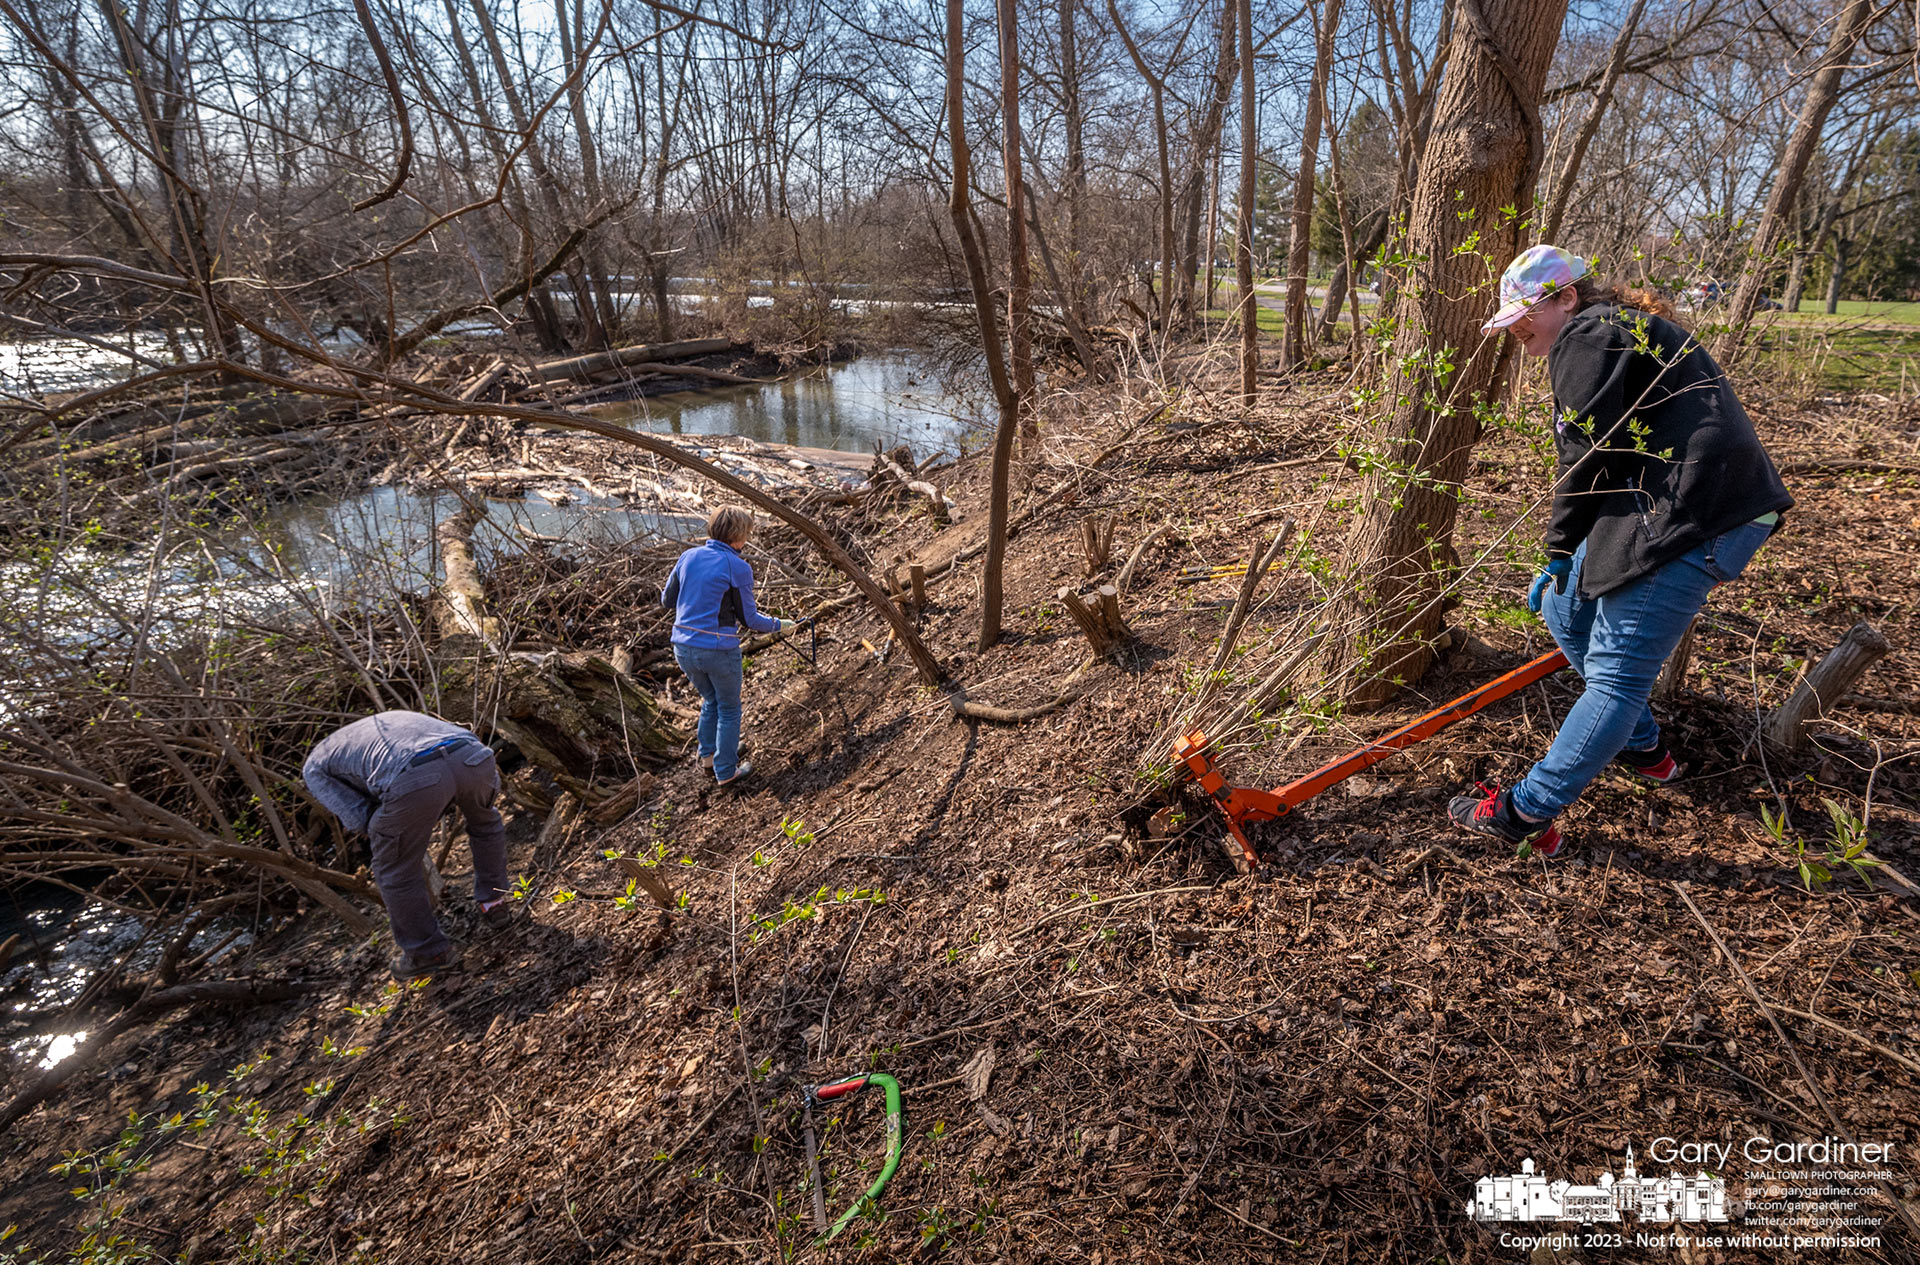 Volunteers and Otterbein University students clear invasive honeysuckle plants growing along the shoreline above and below the low-head dam in Alum Creek in Westerville. My Final Photo for March 30, 2023.